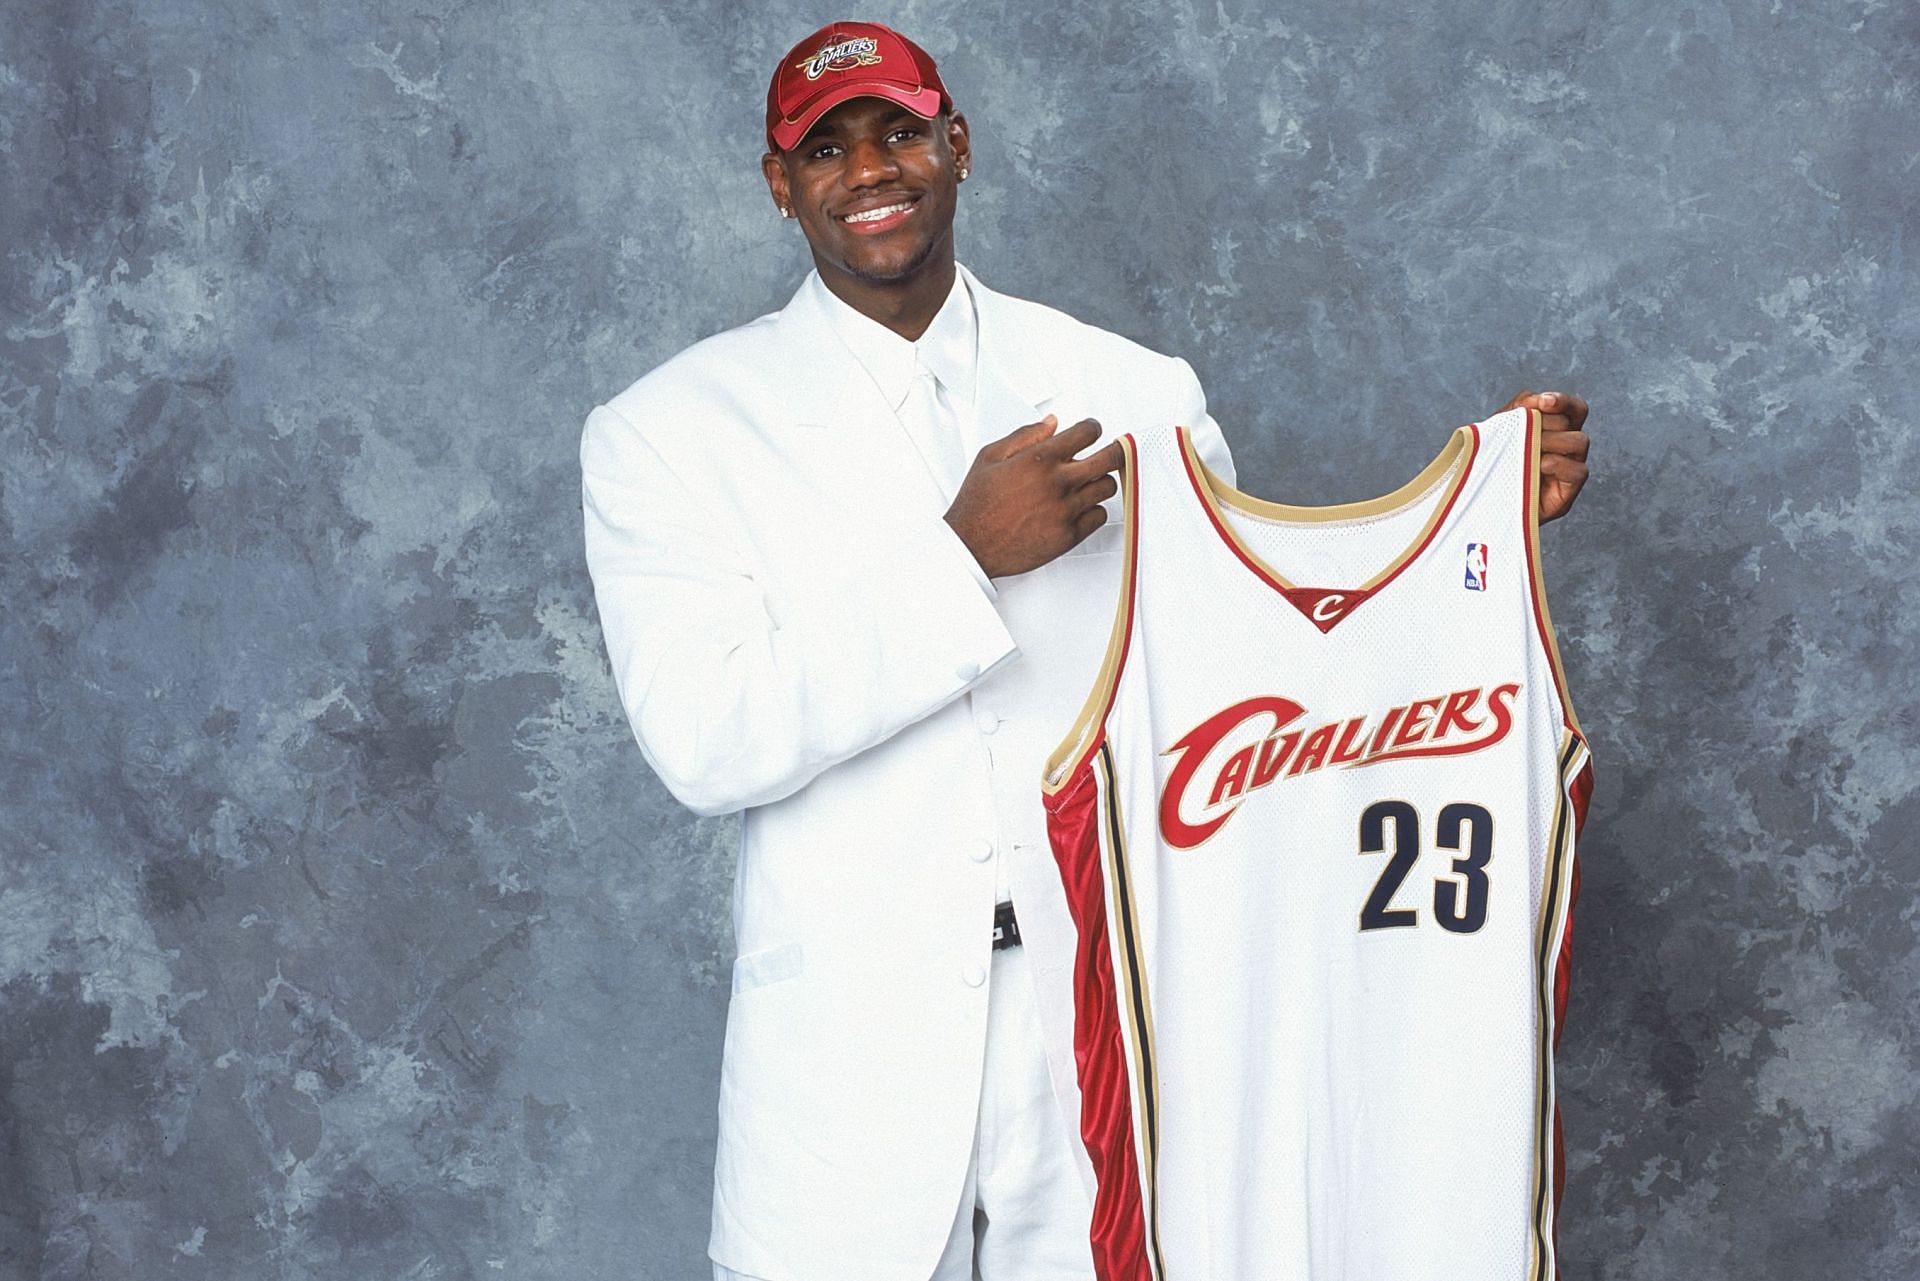 LeBron James posing with the Cleveland Cavaliers Jersey in 2003